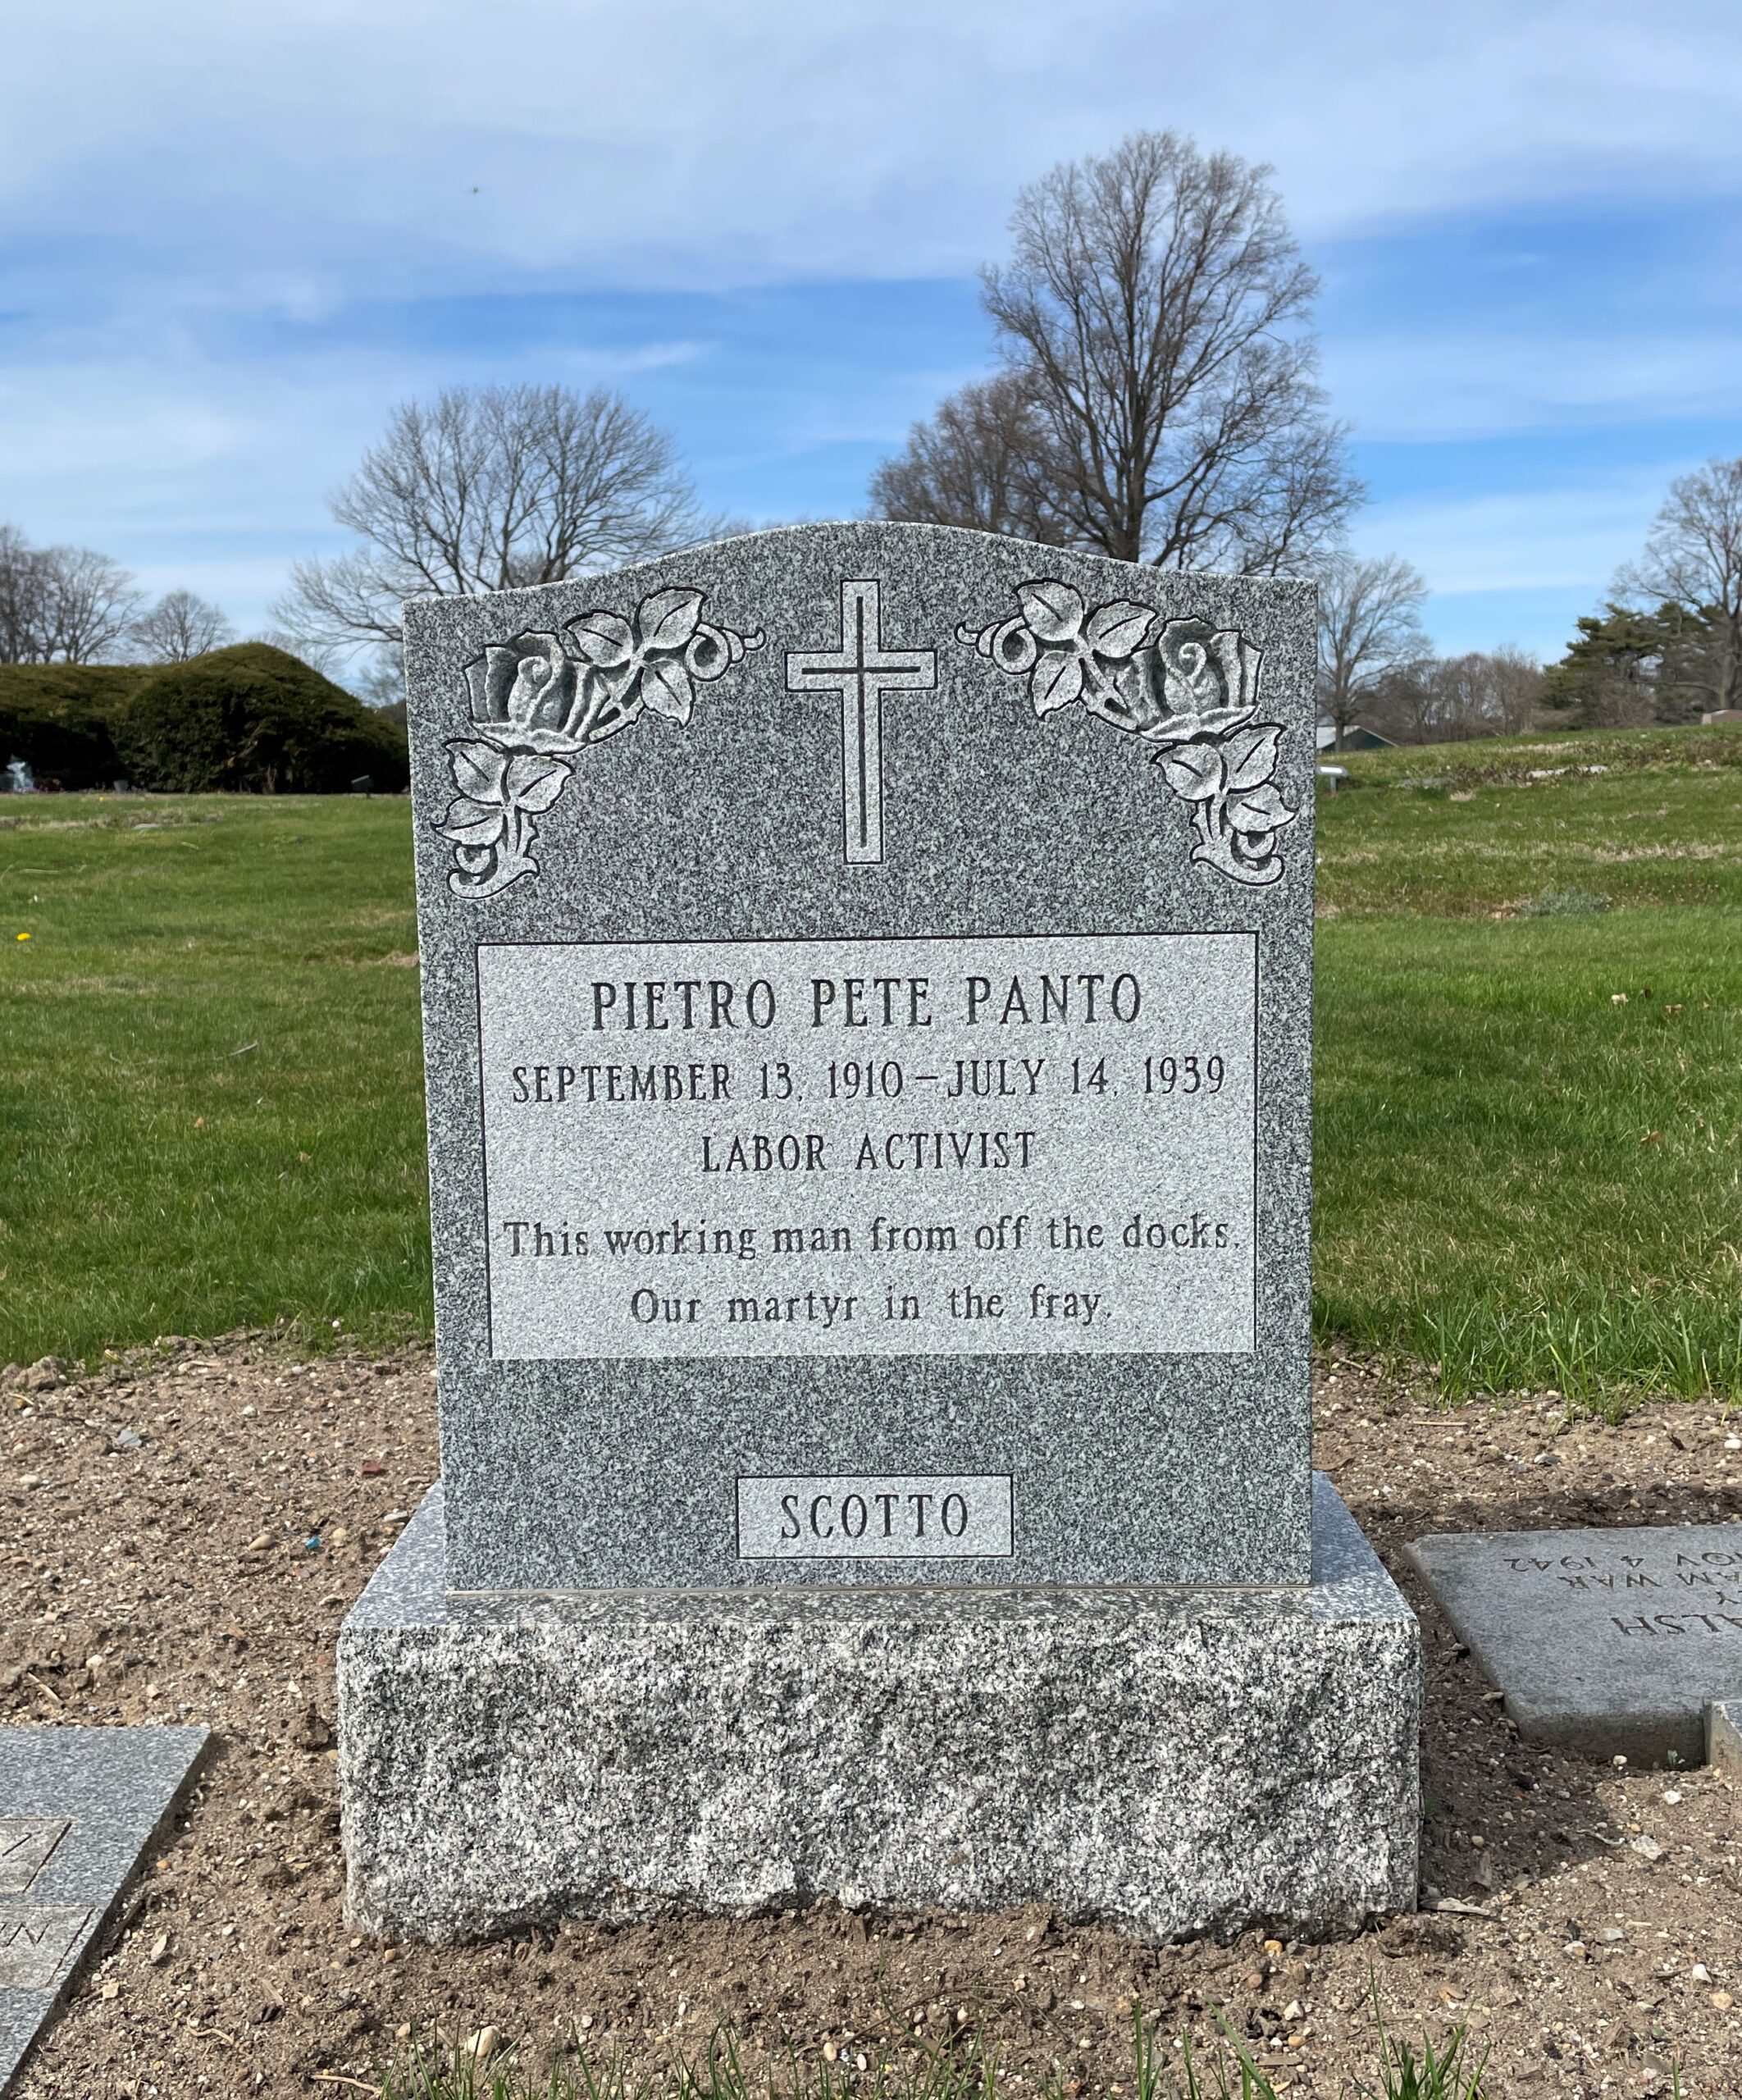 Pete Panto Tombstone: Article in New York Times